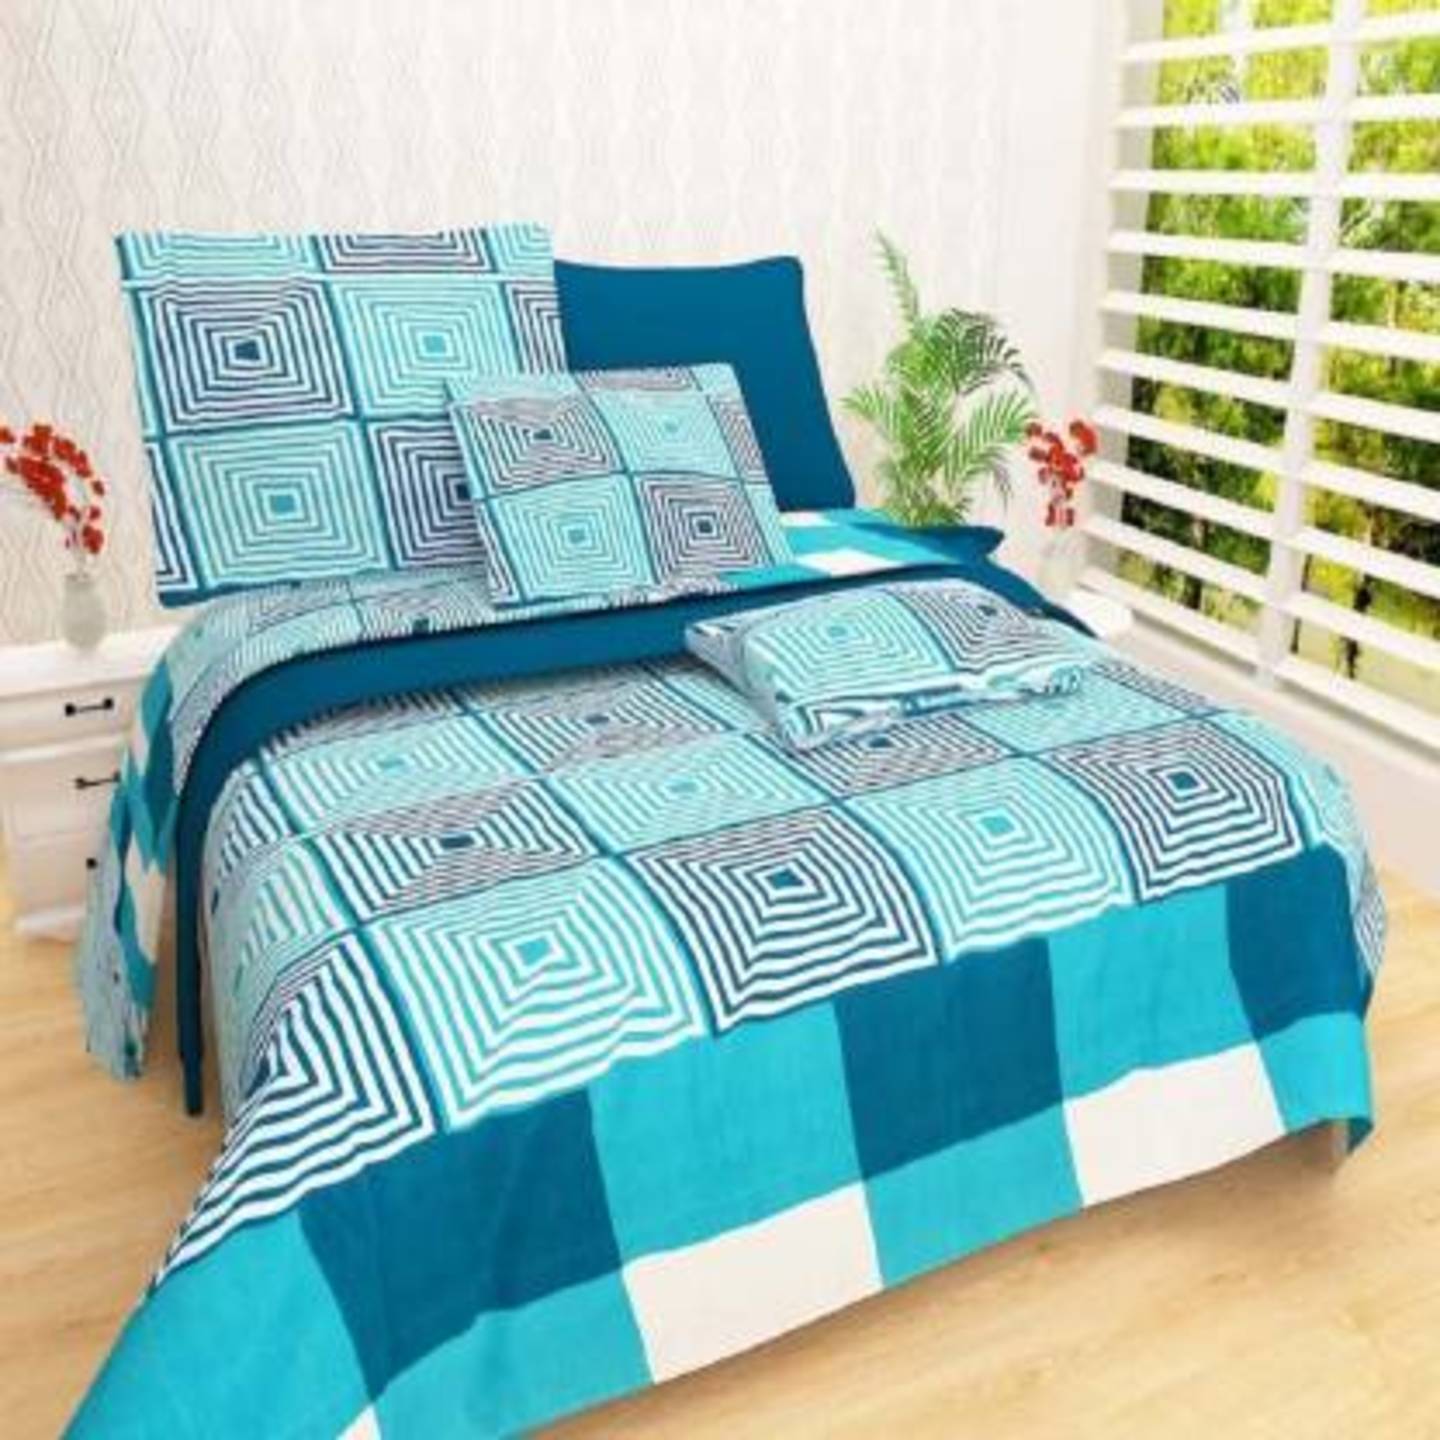 Handtex Home 3d Print cotton double Bed sheet 90x100 inch with 2 pillow cover